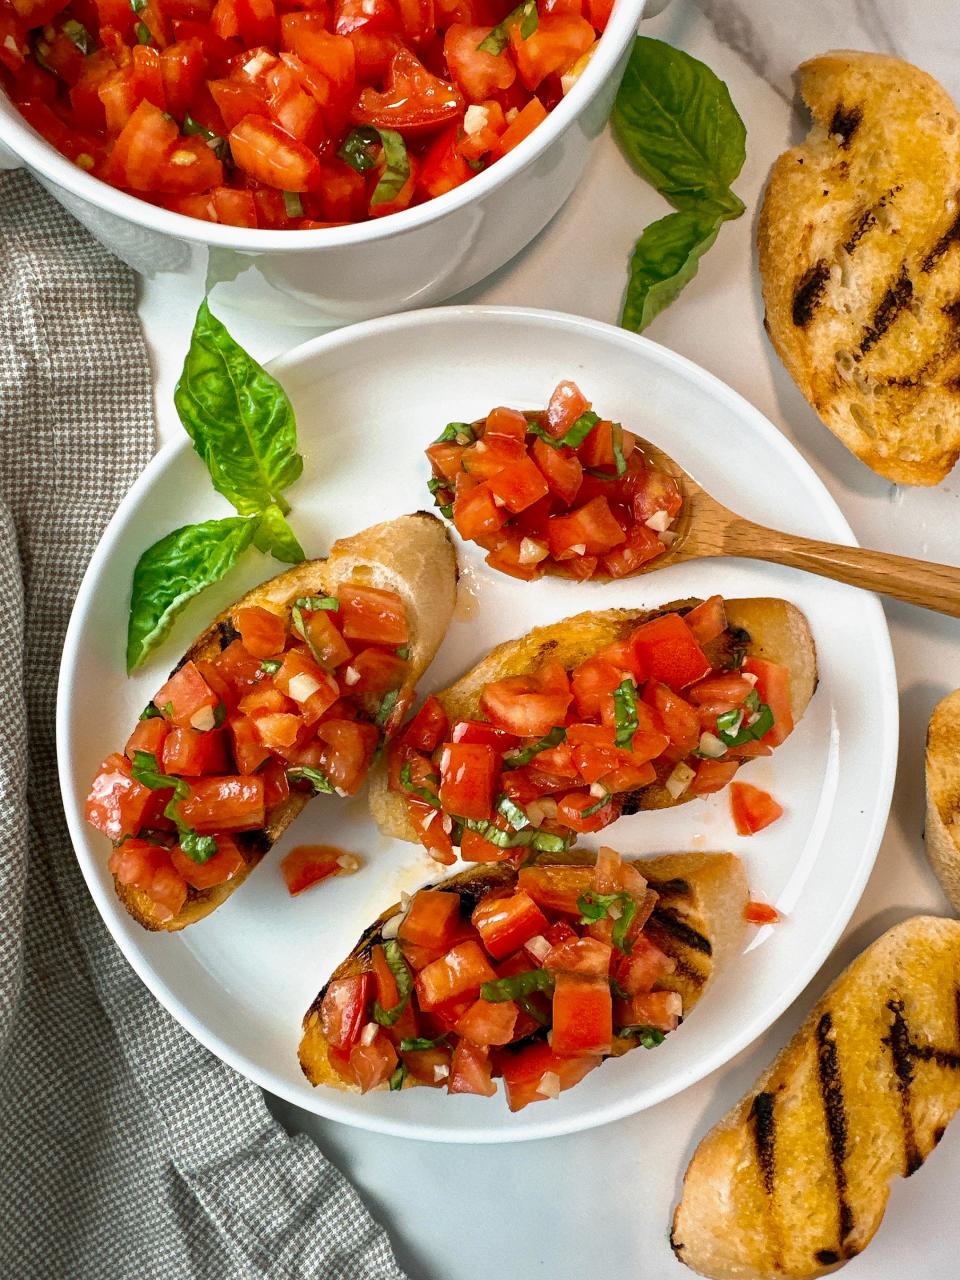 Bruschetta is the ultimate summer appetizer, made with fresh tomatoes, basil, garlic-infused olive oil and crisp bread.